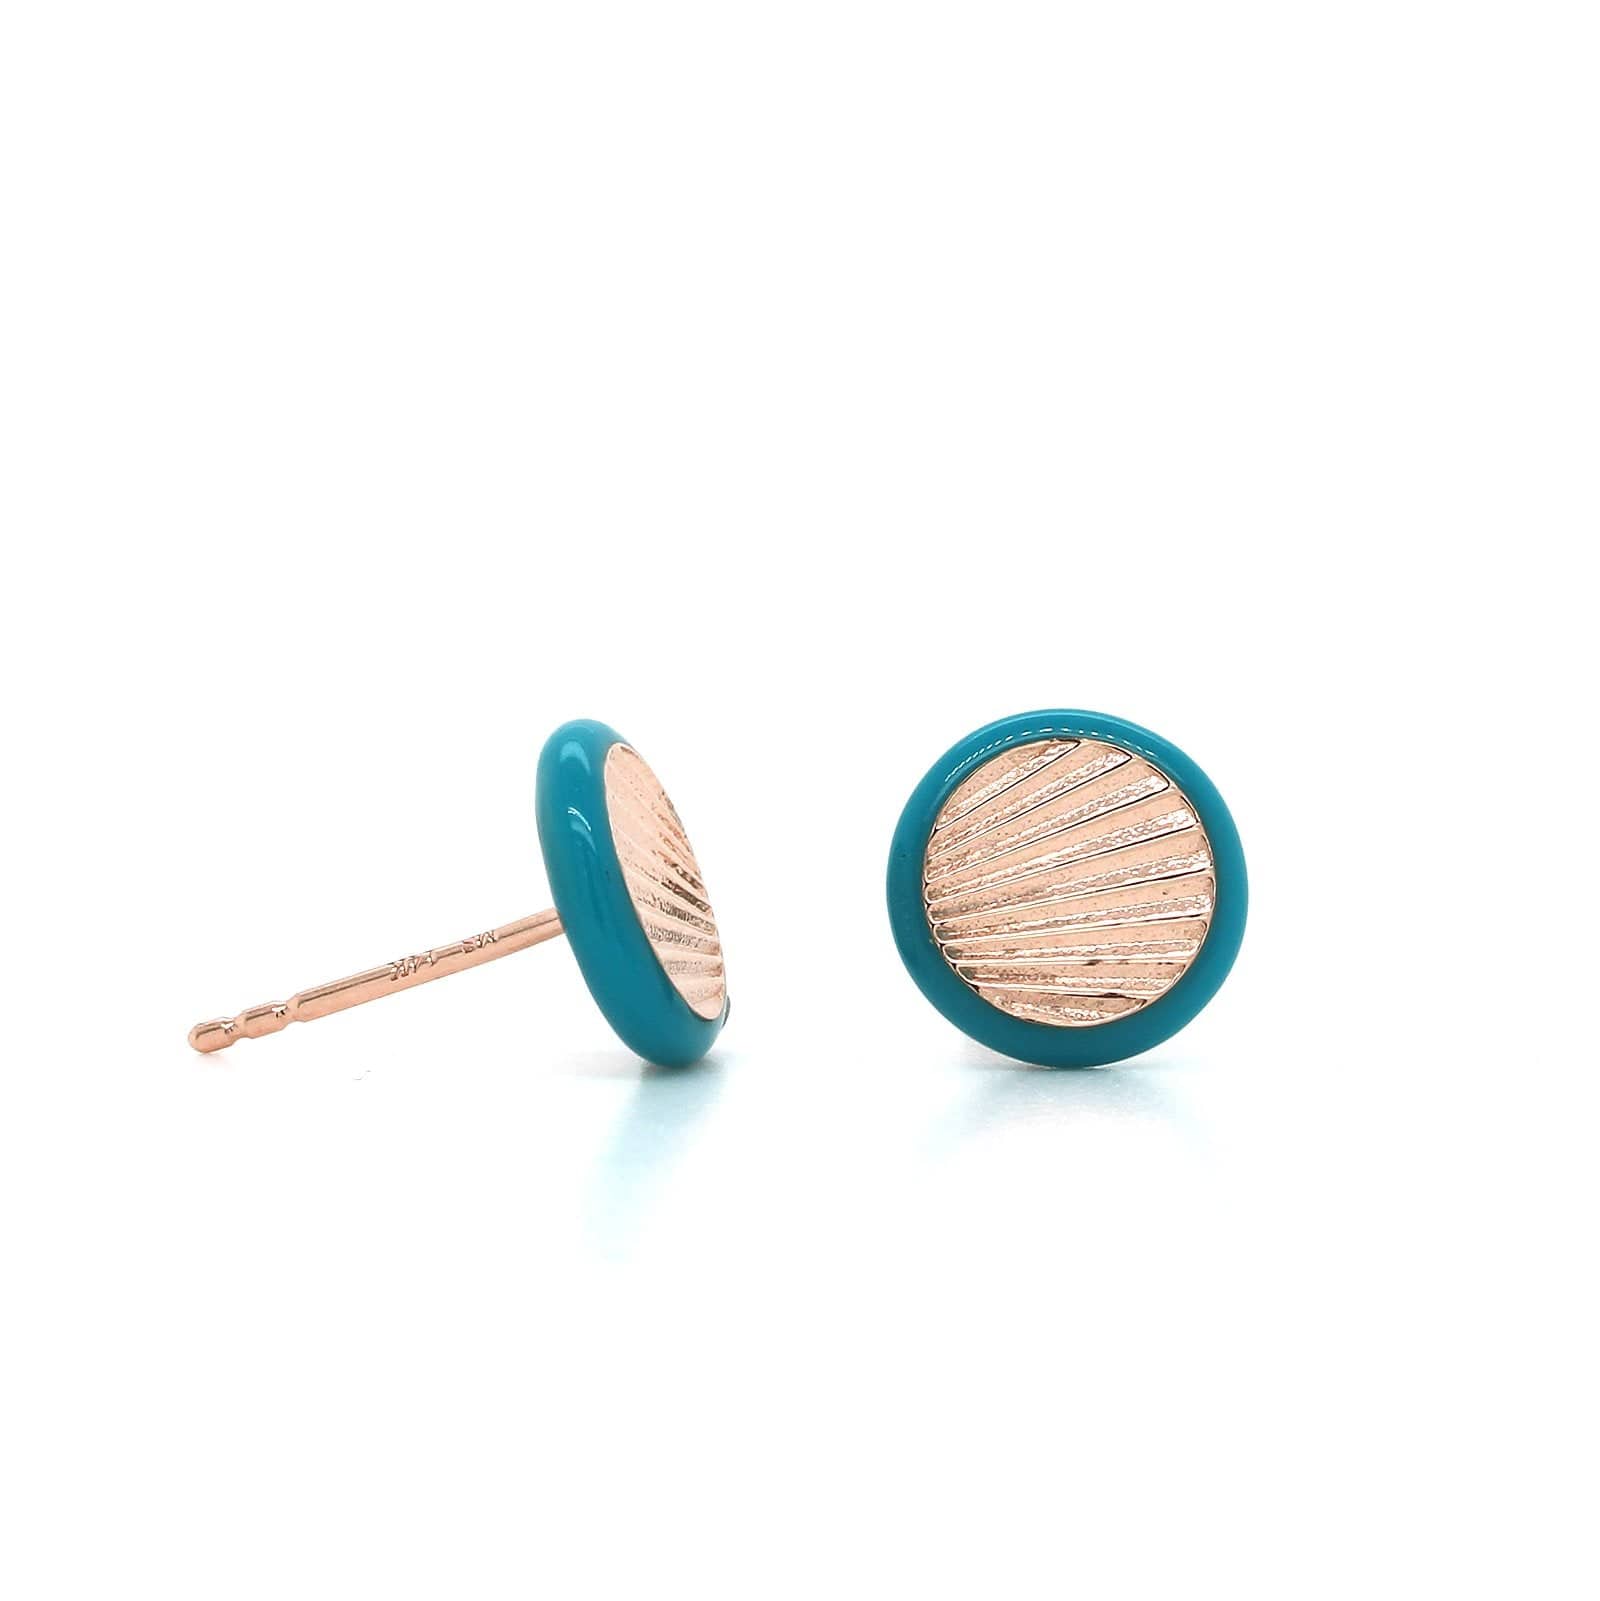 The Leah 14K Rose Gold Turquoise Enamel Fluted Circle Stud Earrings, 14K Rose Gold, Long's Jewelers